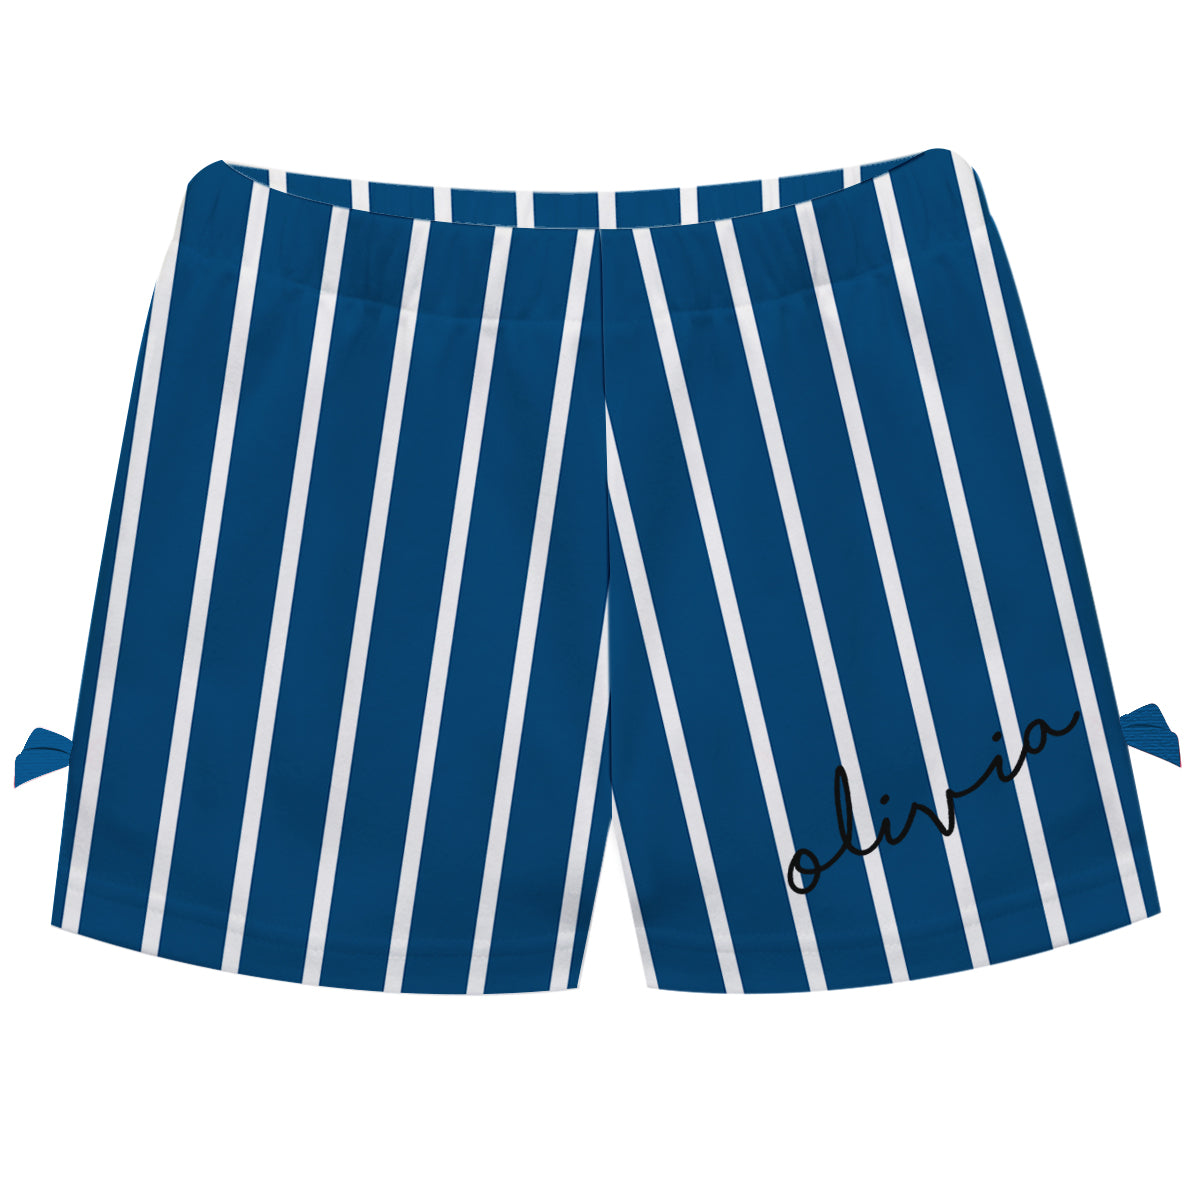 Girls blue and white striped short with name - Wimziy&Co.